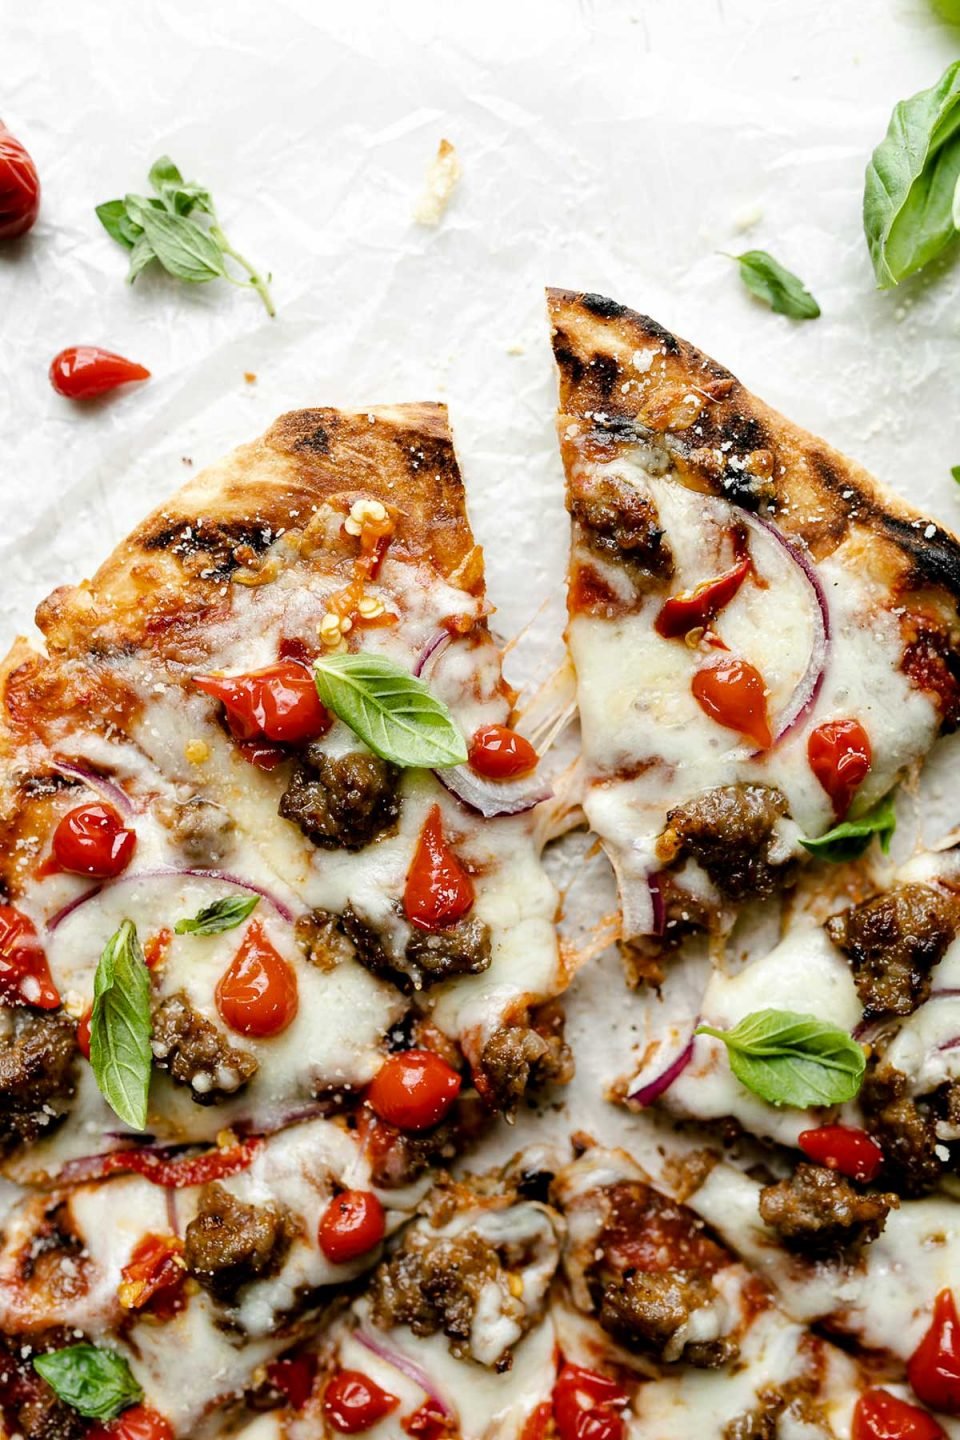 Grilled pizza topped with cheese, Italian sausage, sweetie drop peppers, & fresh basil leaves. The pizza sits atop a white surface, surrounded by fresh basil leaves.